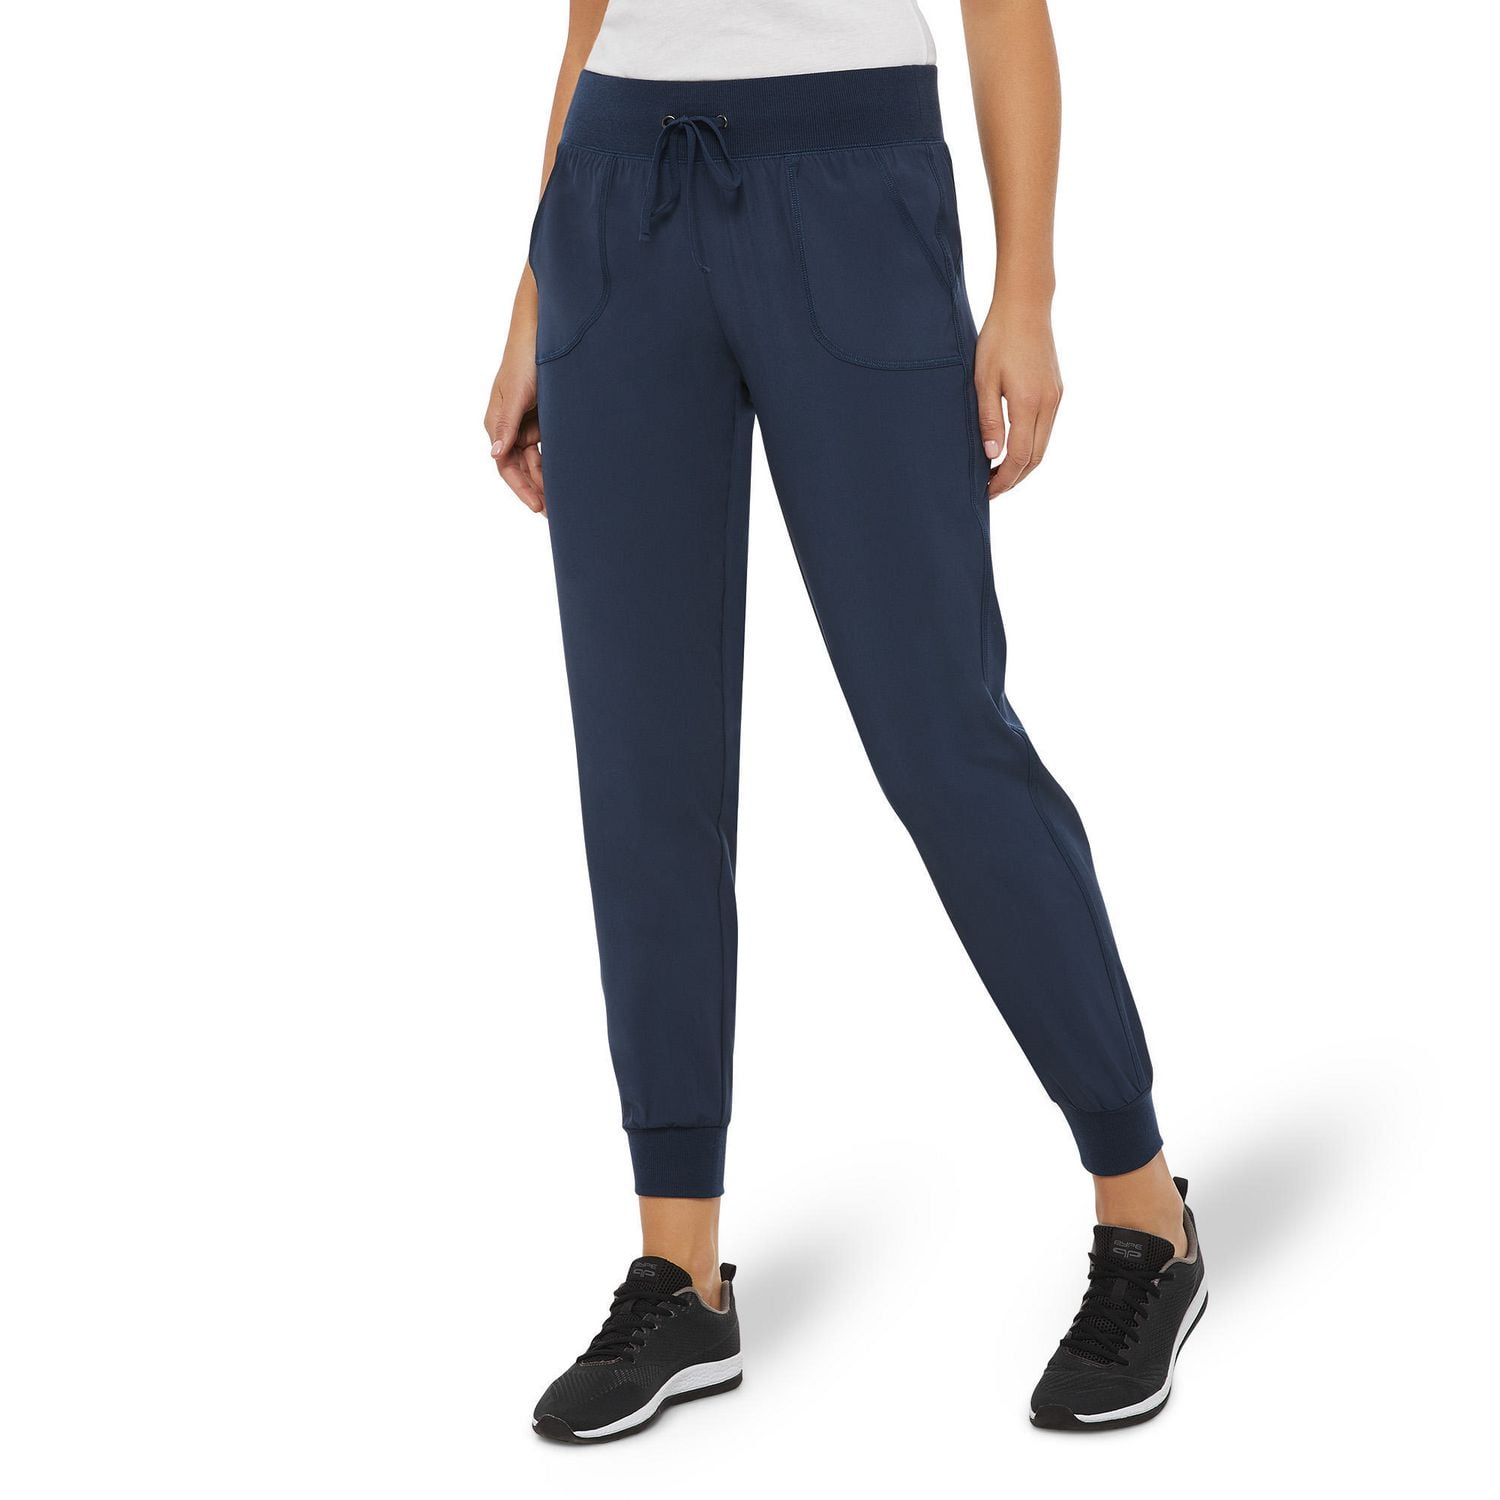 Athletic Works Womens Super Soft Lightweight Jogger Pants W/Side